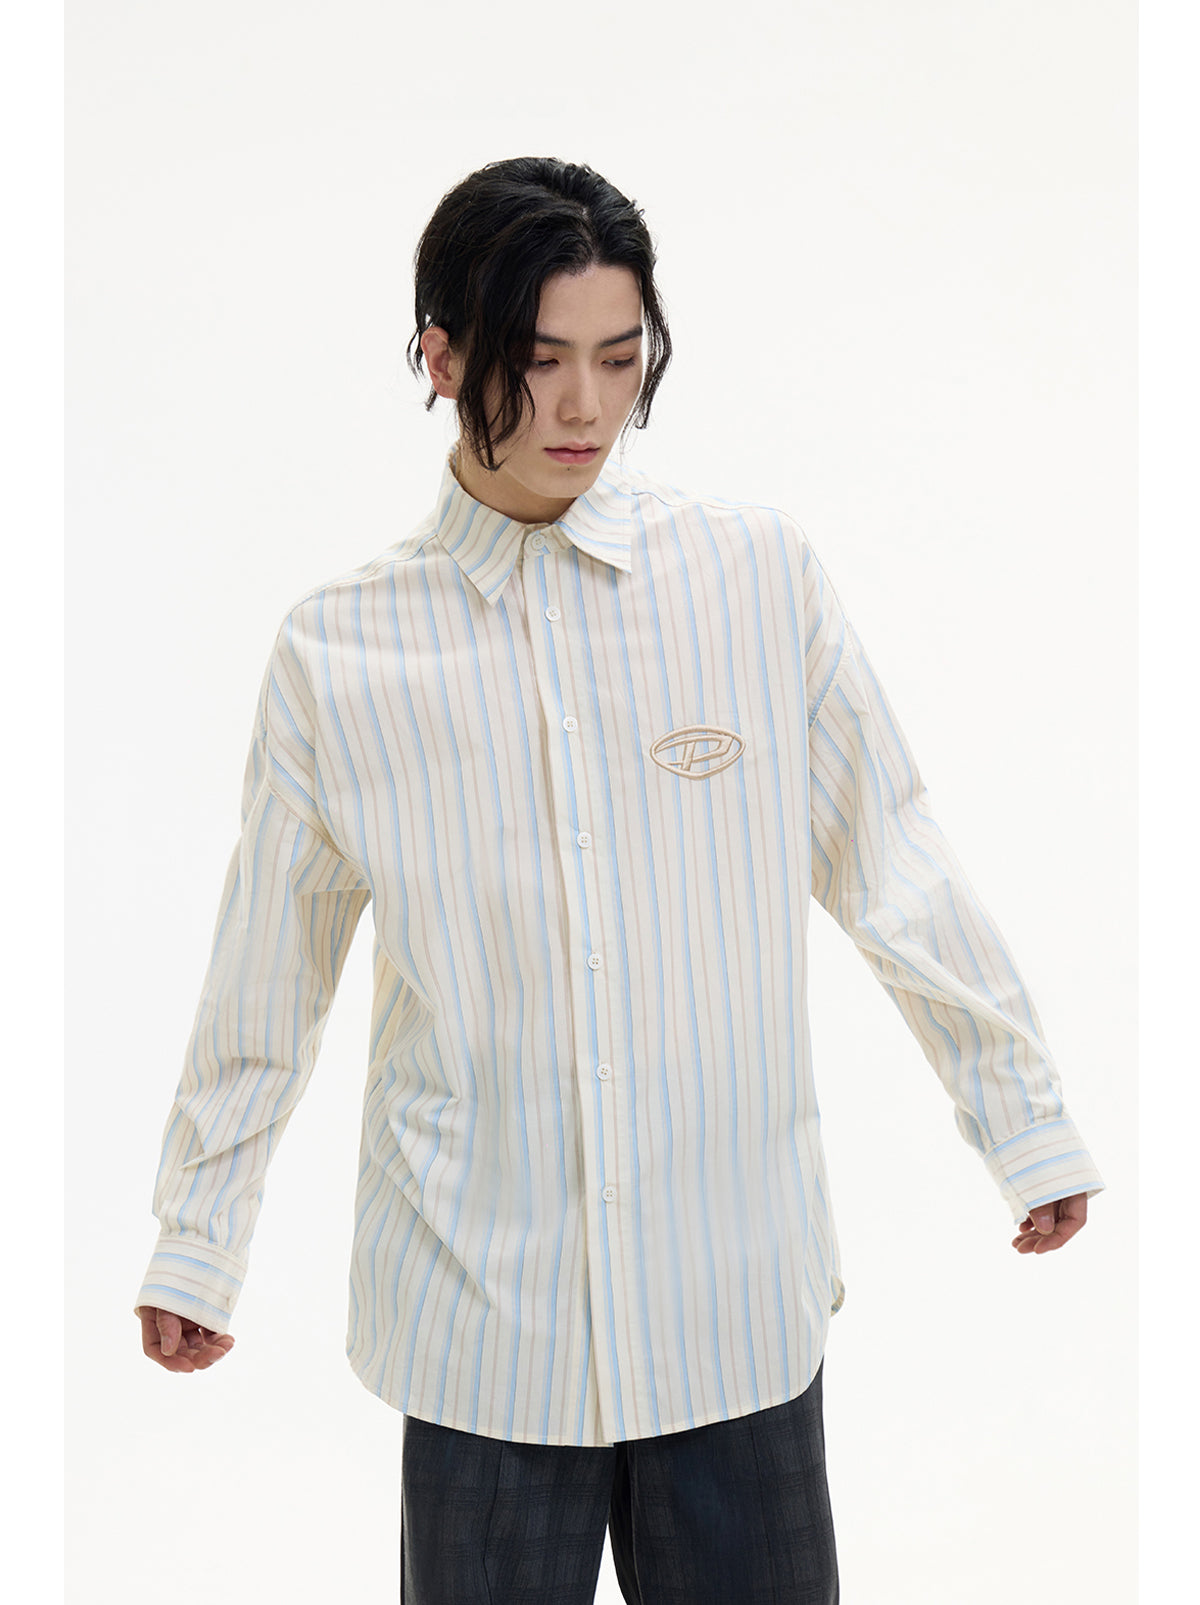 Embroidered stripe shirts